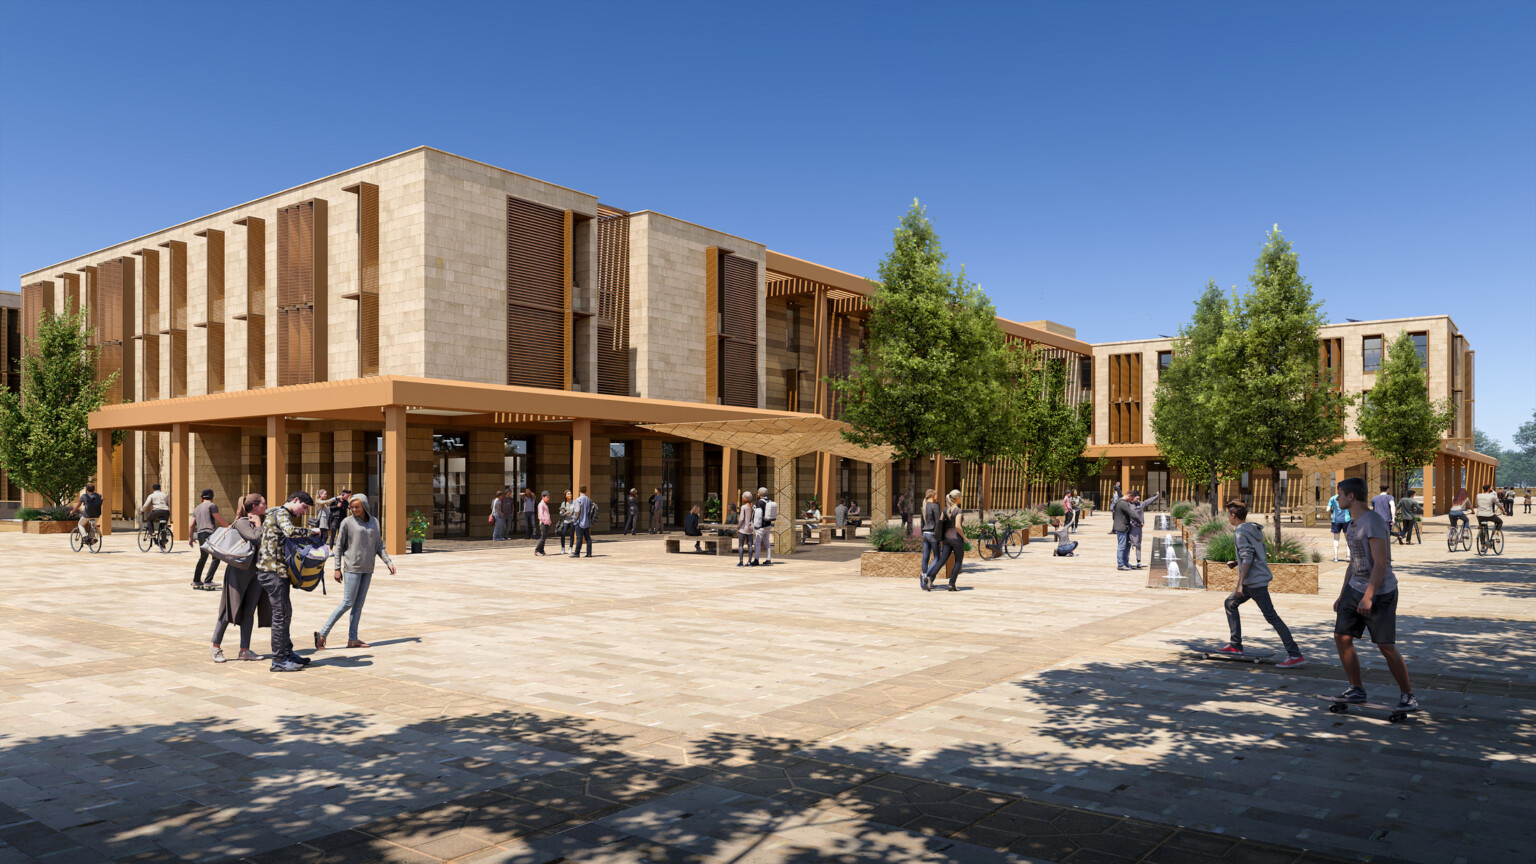 An exterior render of a modern university campus building with large windows and wooden accents. In front of the building is a spacious plaza with neatly paved walkways and several trees providing shade